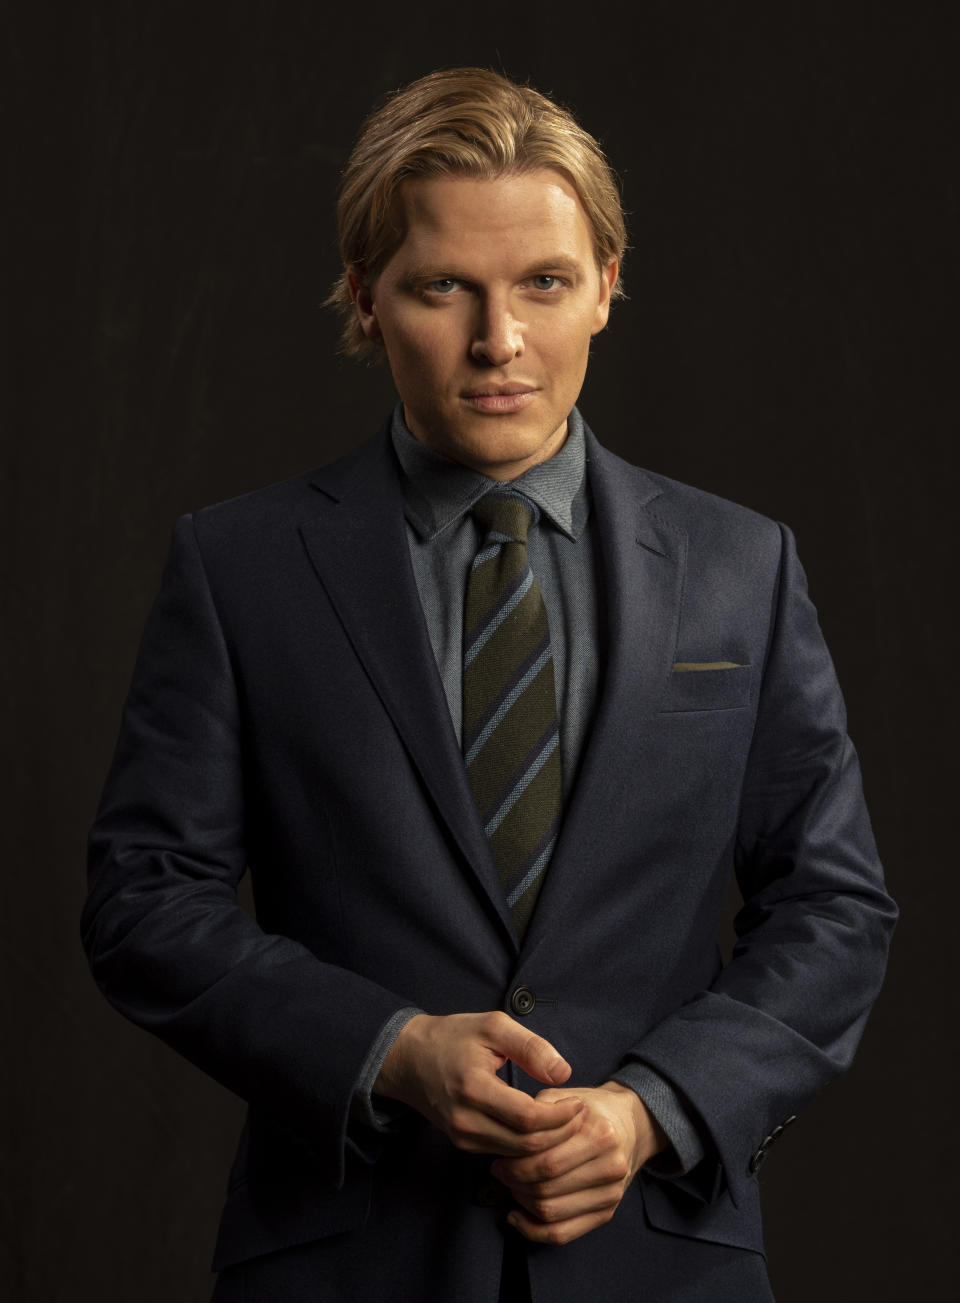 Oct 11, 2019; New York, NY, USA; New York, NY, U.S.A; Ronan Farrow poses for a portrait. His explosive new book, "Catch and Kill," is out Tuesday, Oct. 15. Mandatory Credit: Robert Deutsch-USA TODAY Sports/Sipa USA